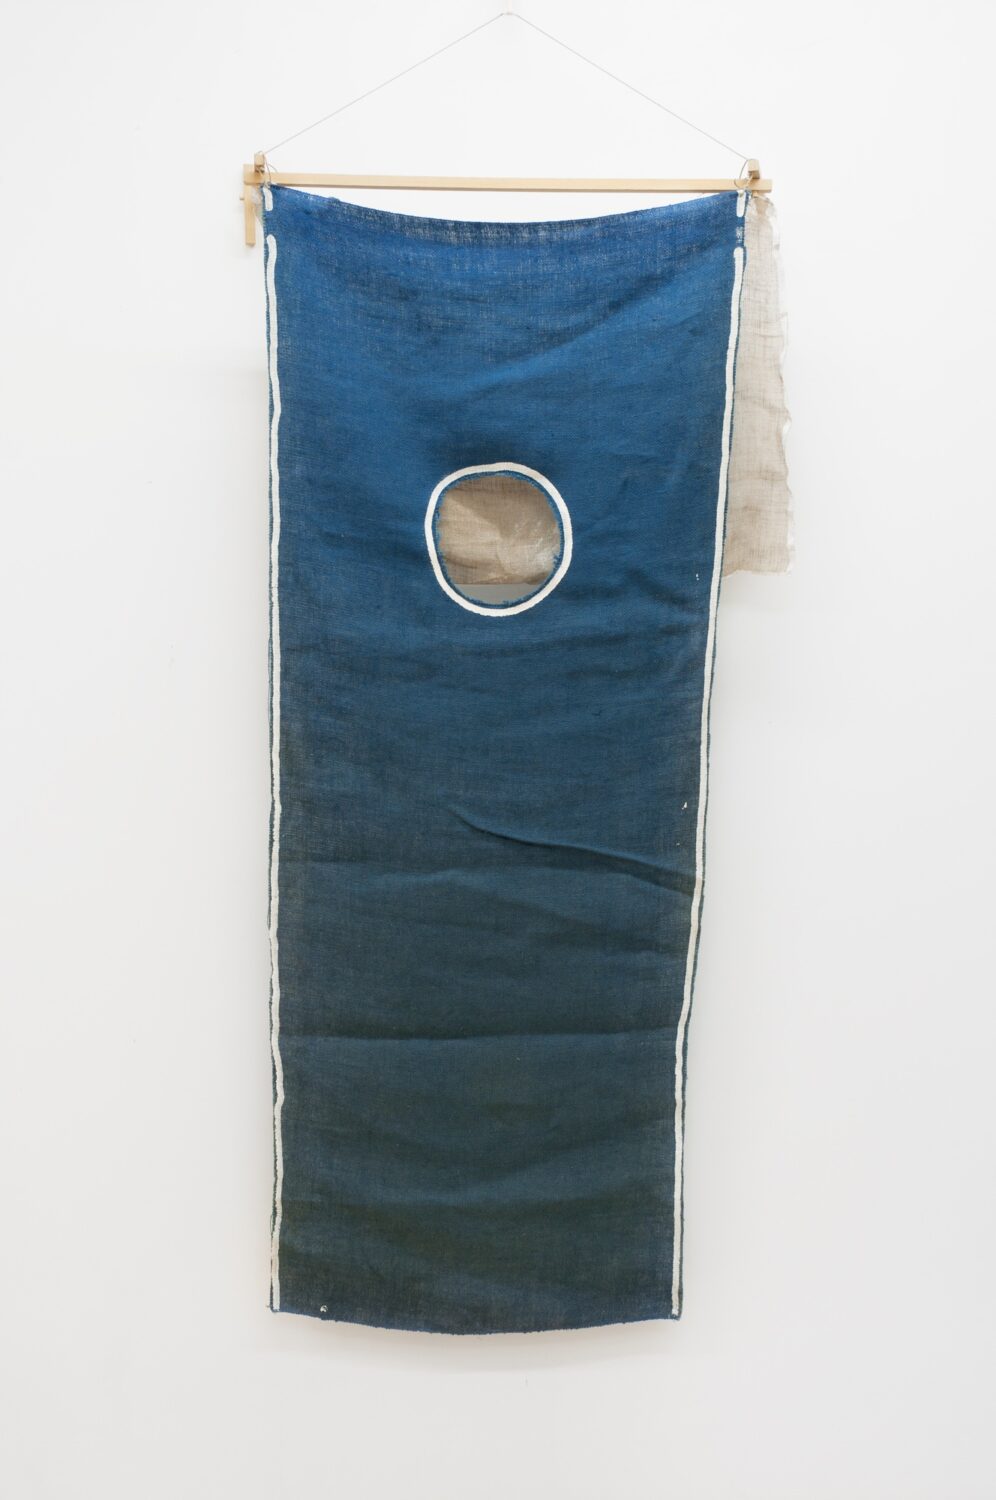 Untitled (blue wall hanging)